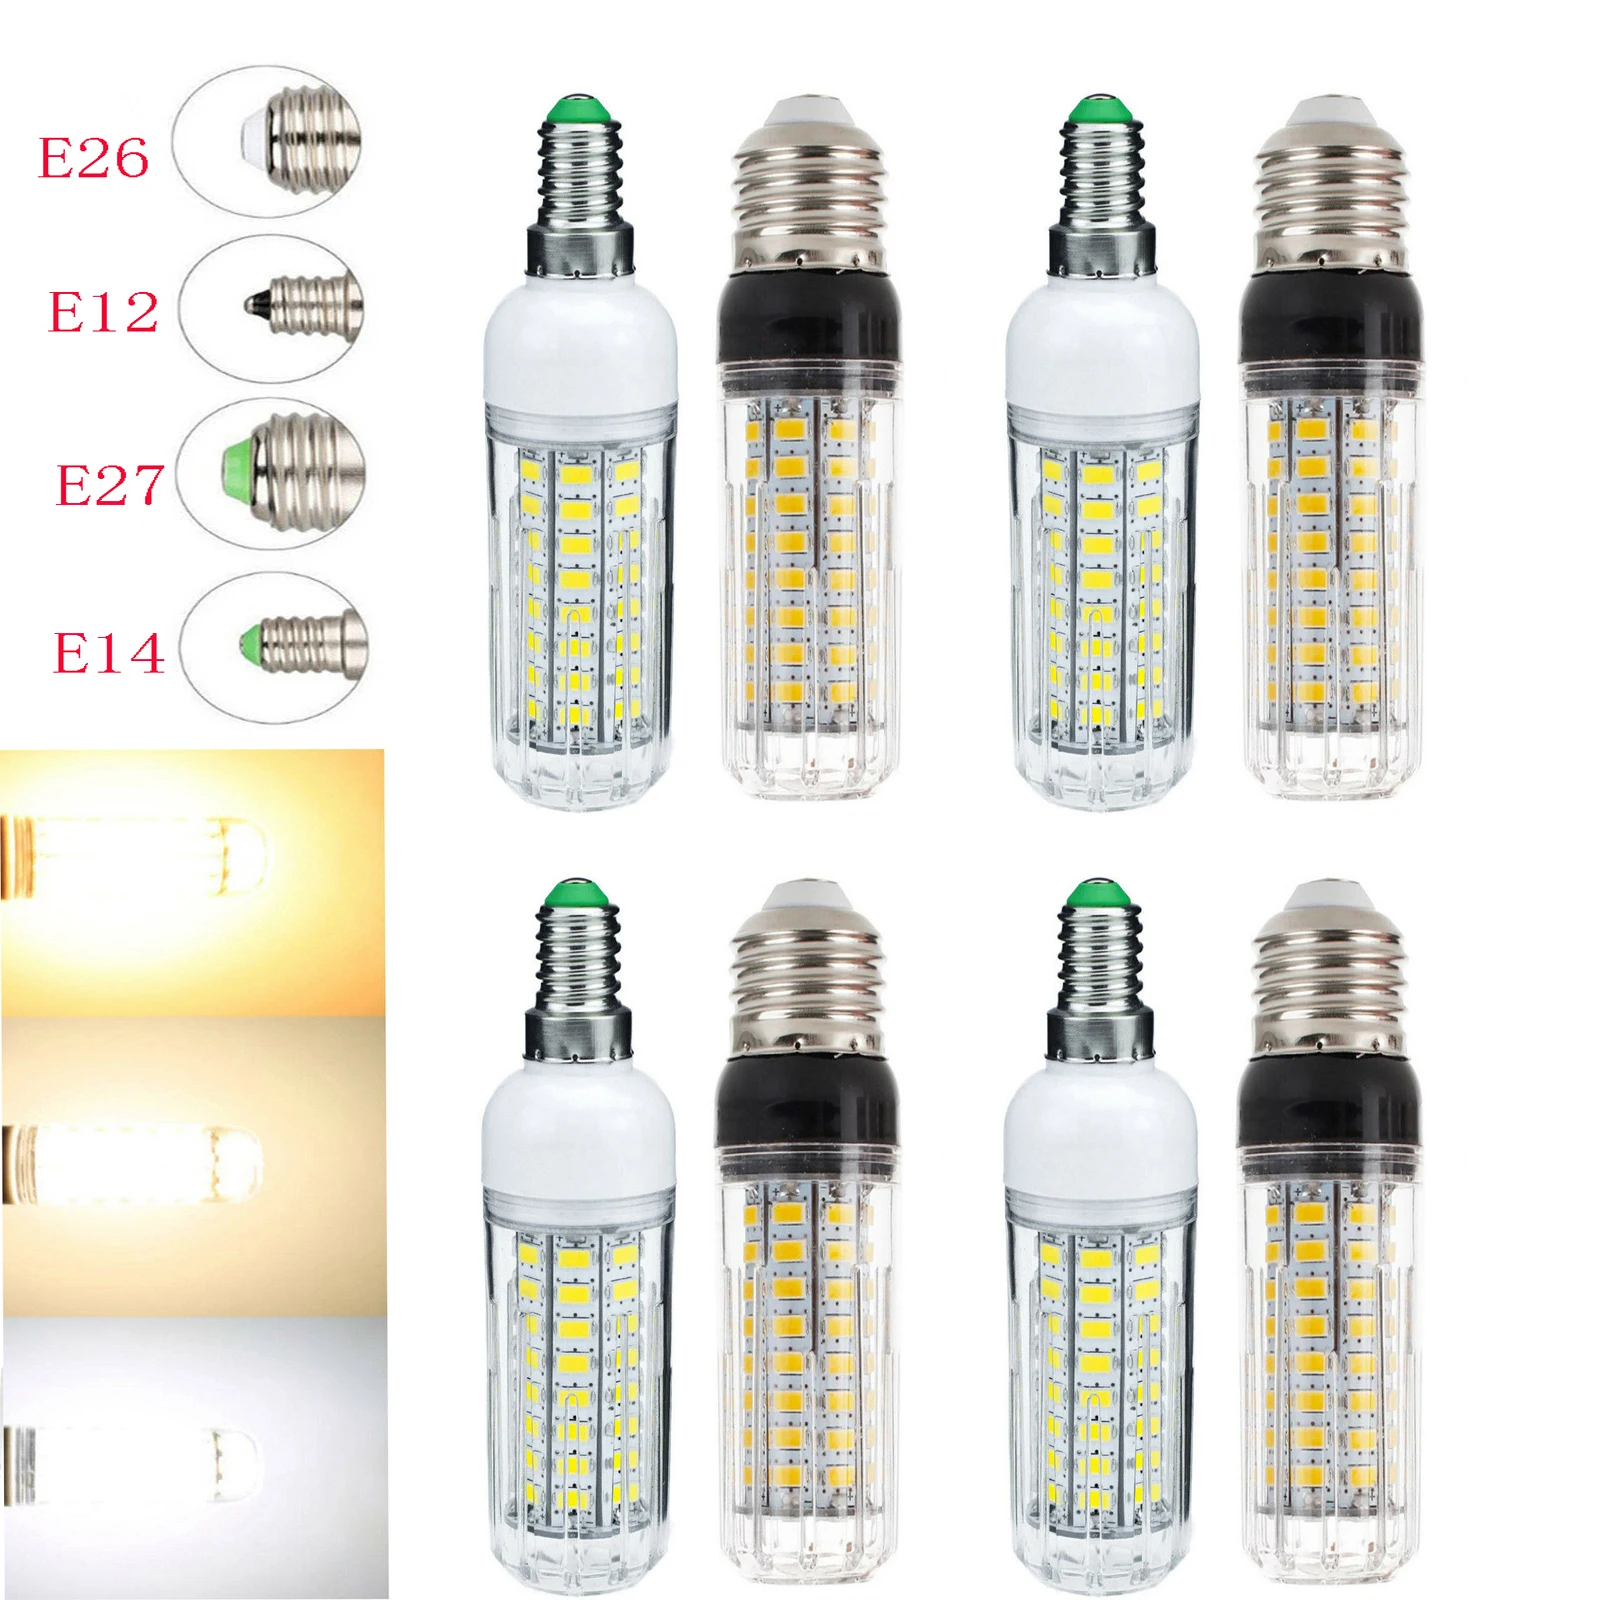 10Pcs Low Price E14 E27 E12 E26 B22 12V LED Bulb LED Corn Bulb 72LEDs 20W Chandelier Candle LED Light Cool White/Neutral White/W